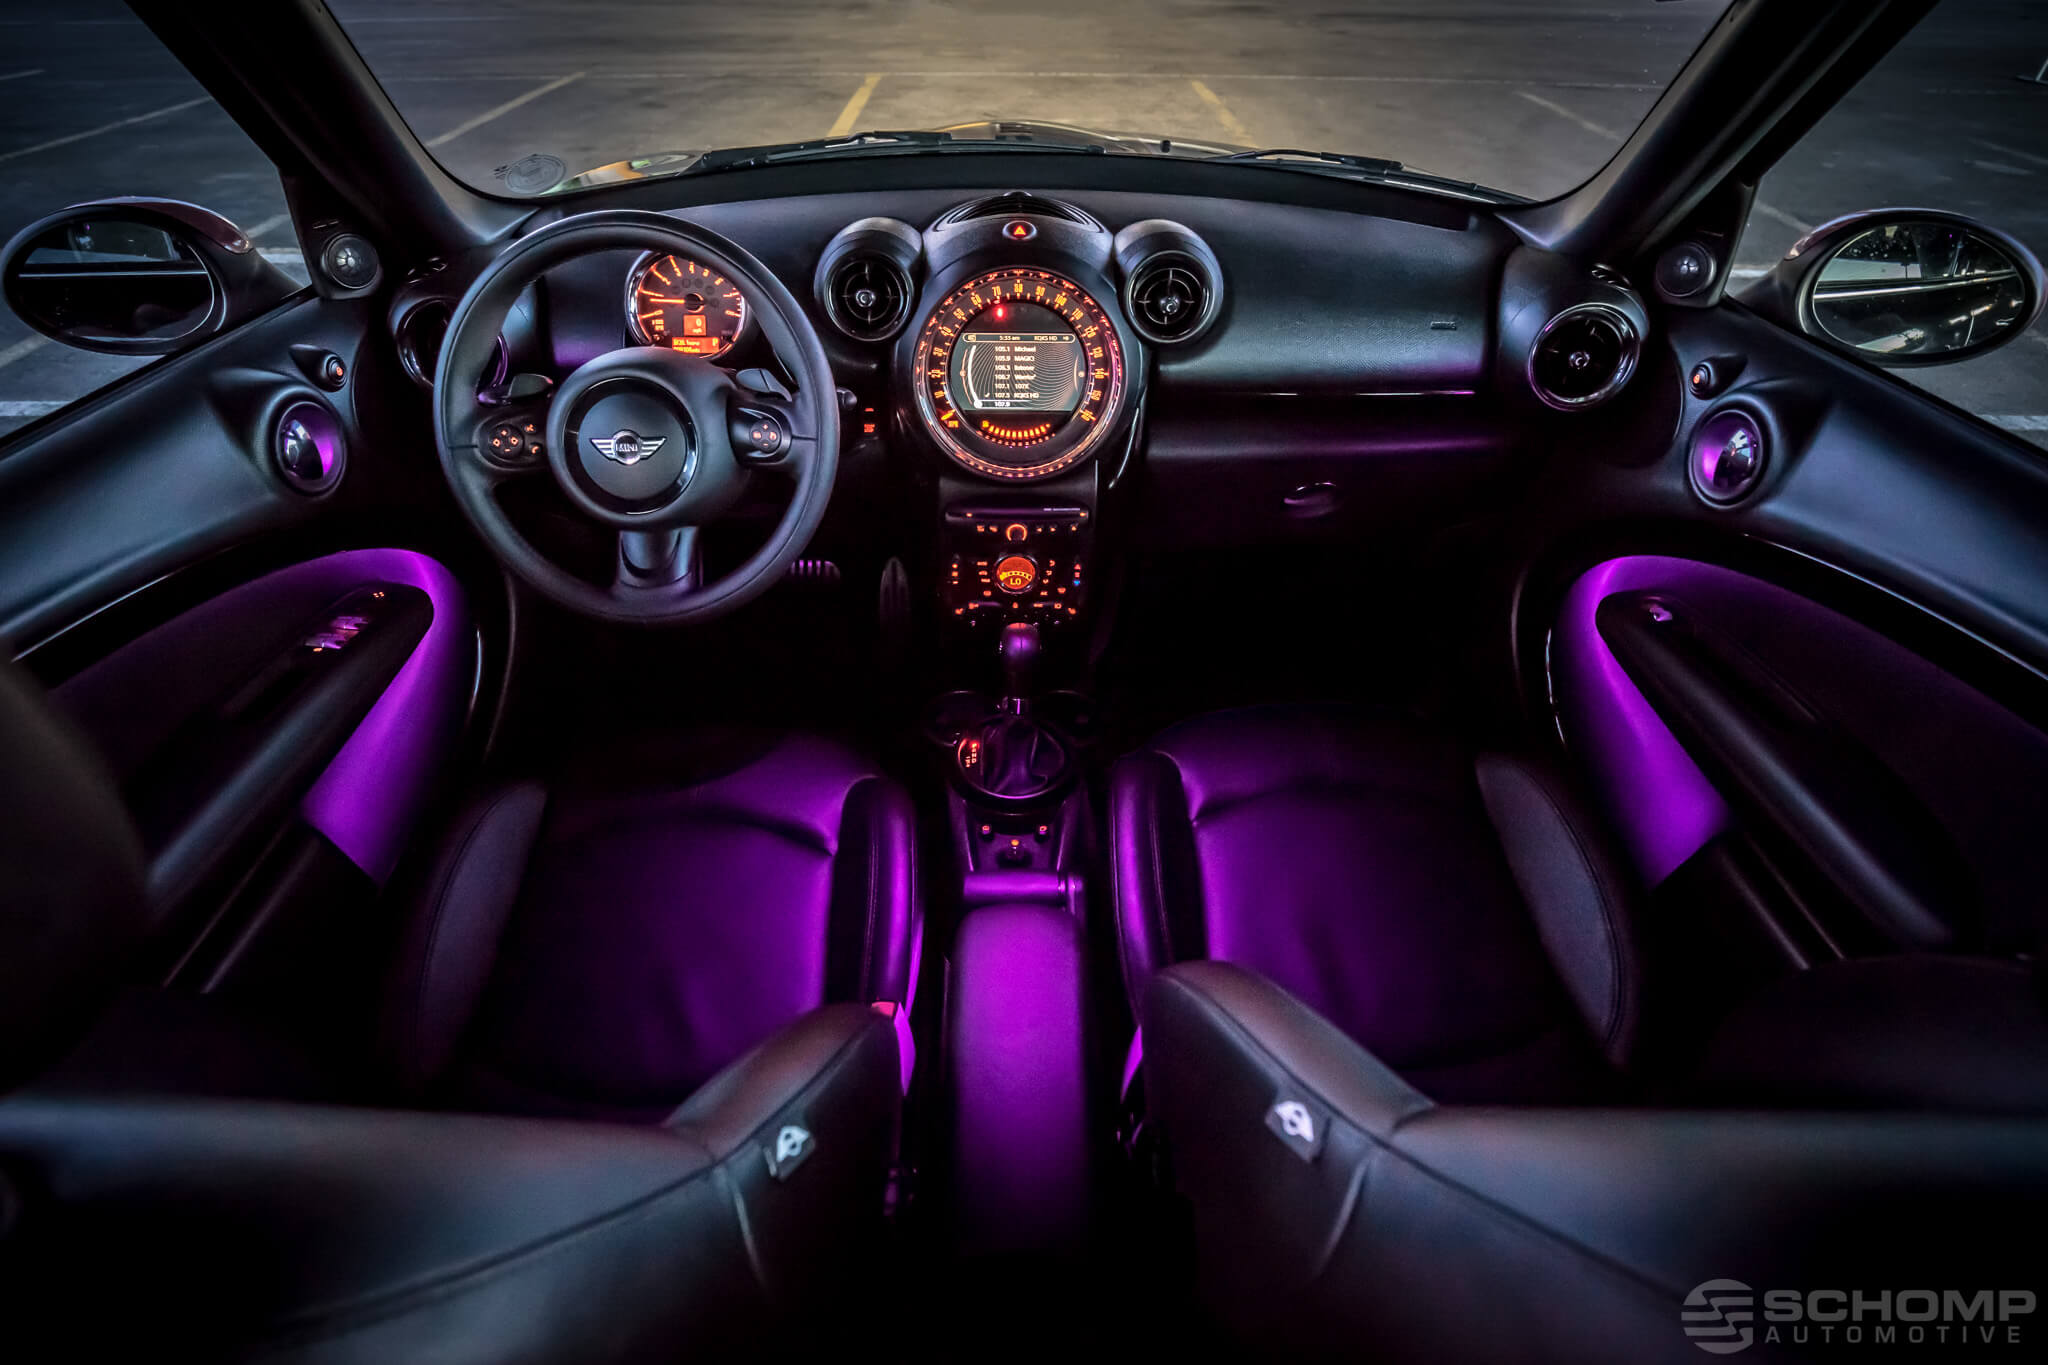 27 Most Attractive Car Interior Light Ideas To Give A Classy Look